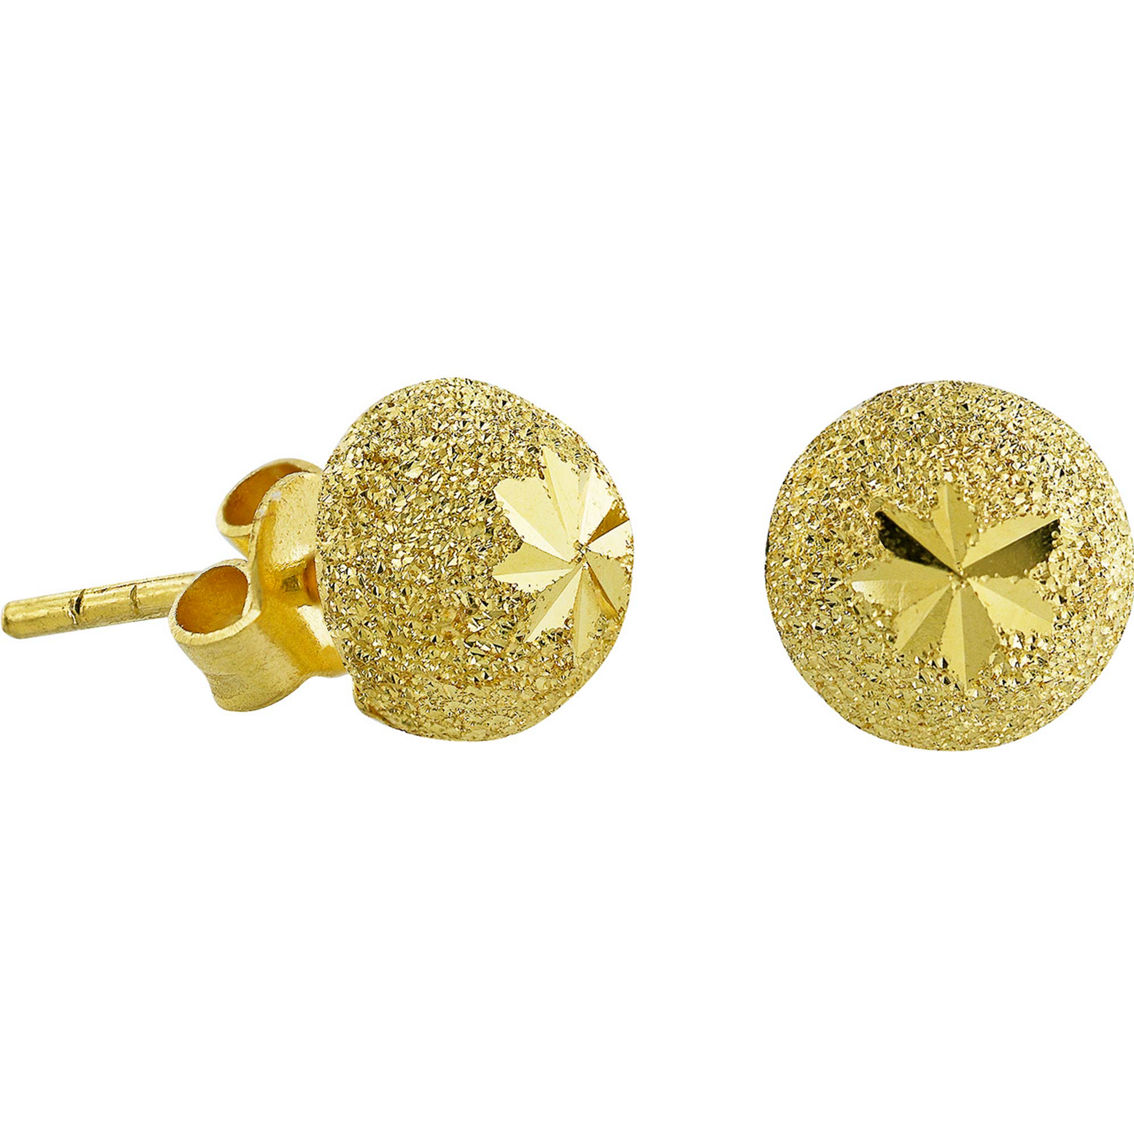 Details about   23K 24K Rose Flower Thai Baht Yellow Gold Plated Stud Earrings Excellent Jewelry 